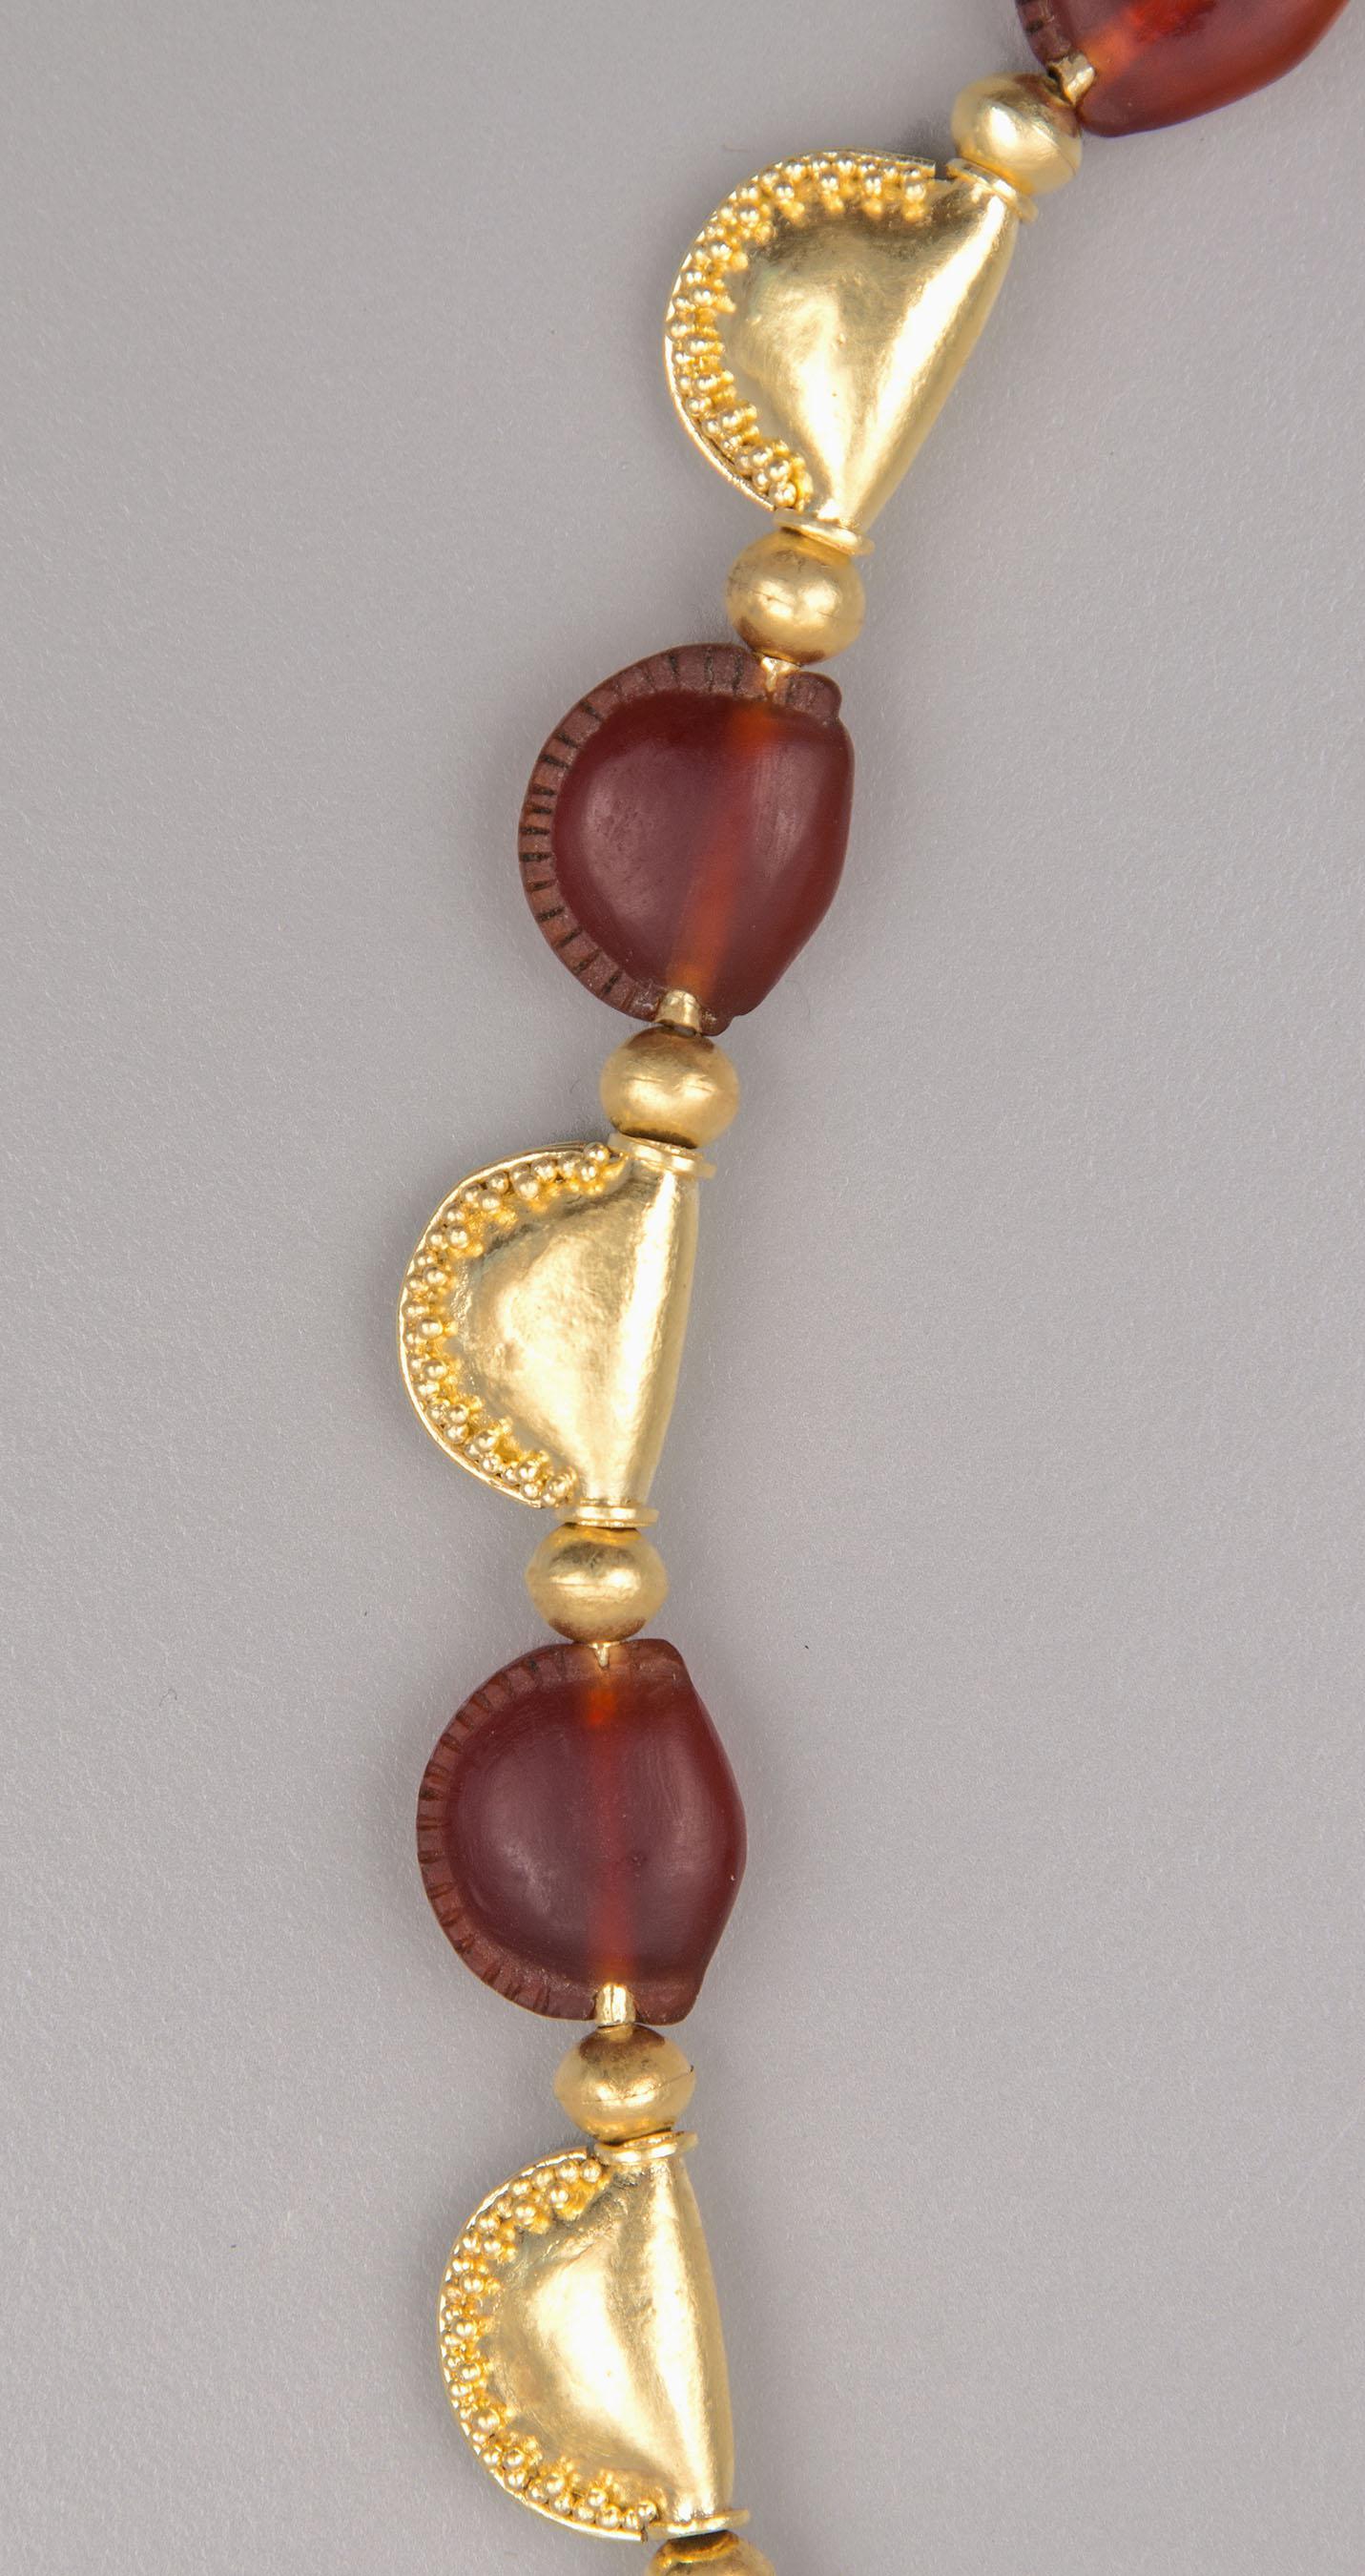 Eleven ancient carnelian beads and ten gold beads, all shaped to resemble cowrie shells. There are twenty-two spherical gold beads alternating between the shell beads. There are stirrup beading tips at each end which provide attachment loops for the